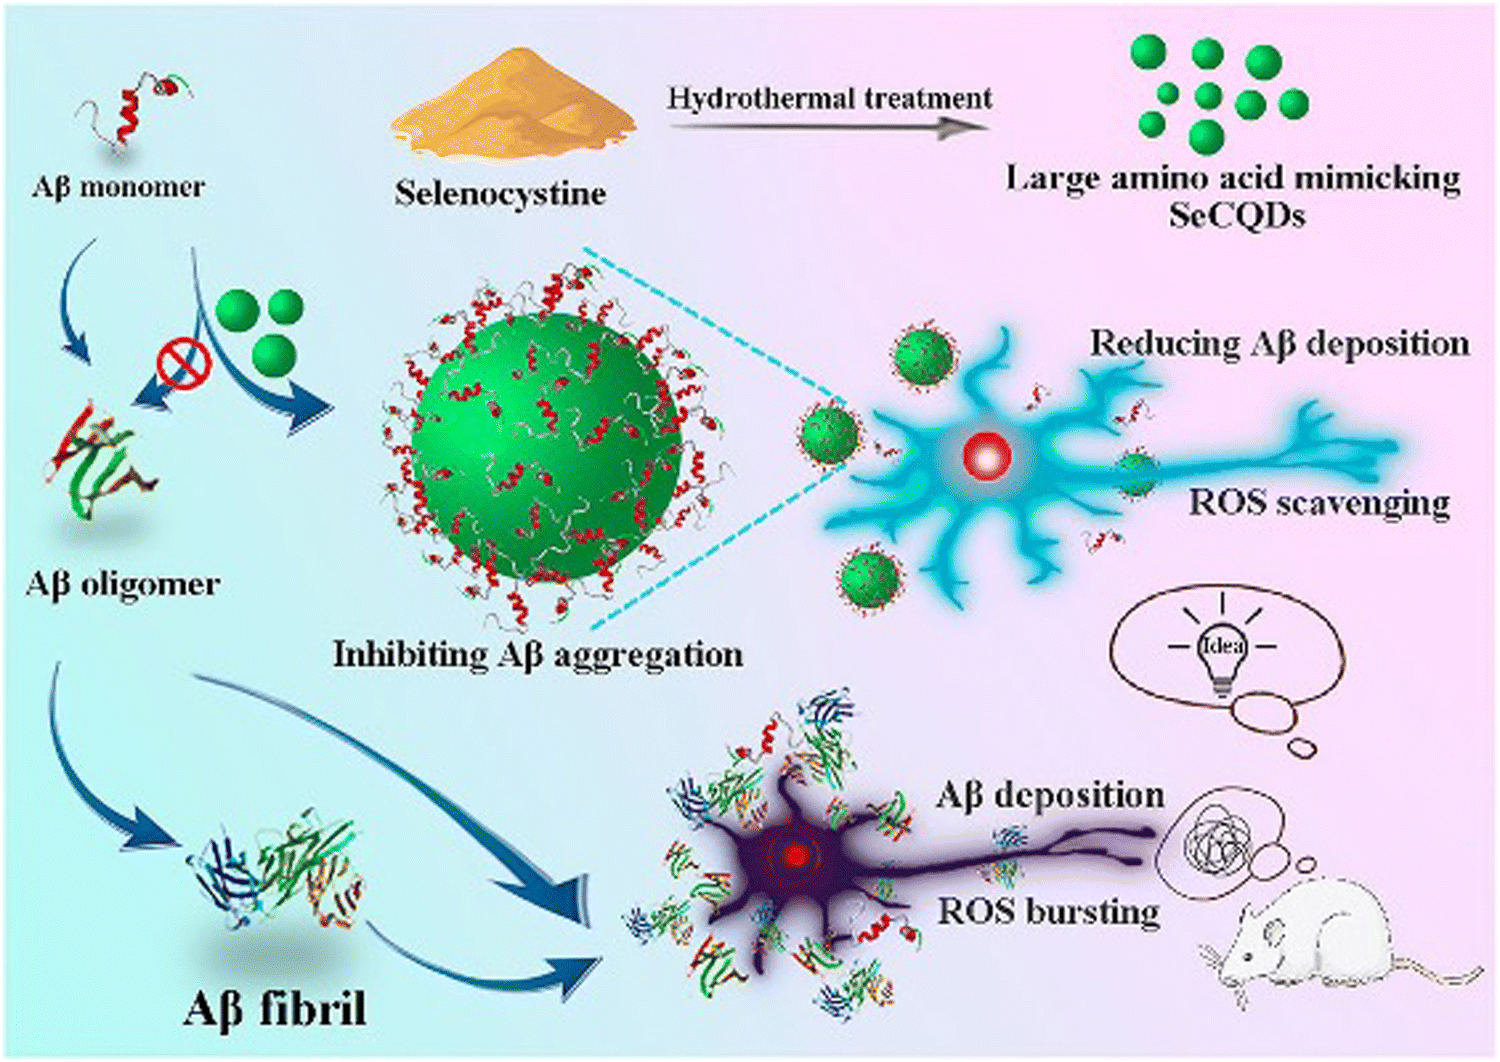 Design and fabrication of intracellular therapeutic cargo delivery systems based on nanomaterials current status and future perspectives